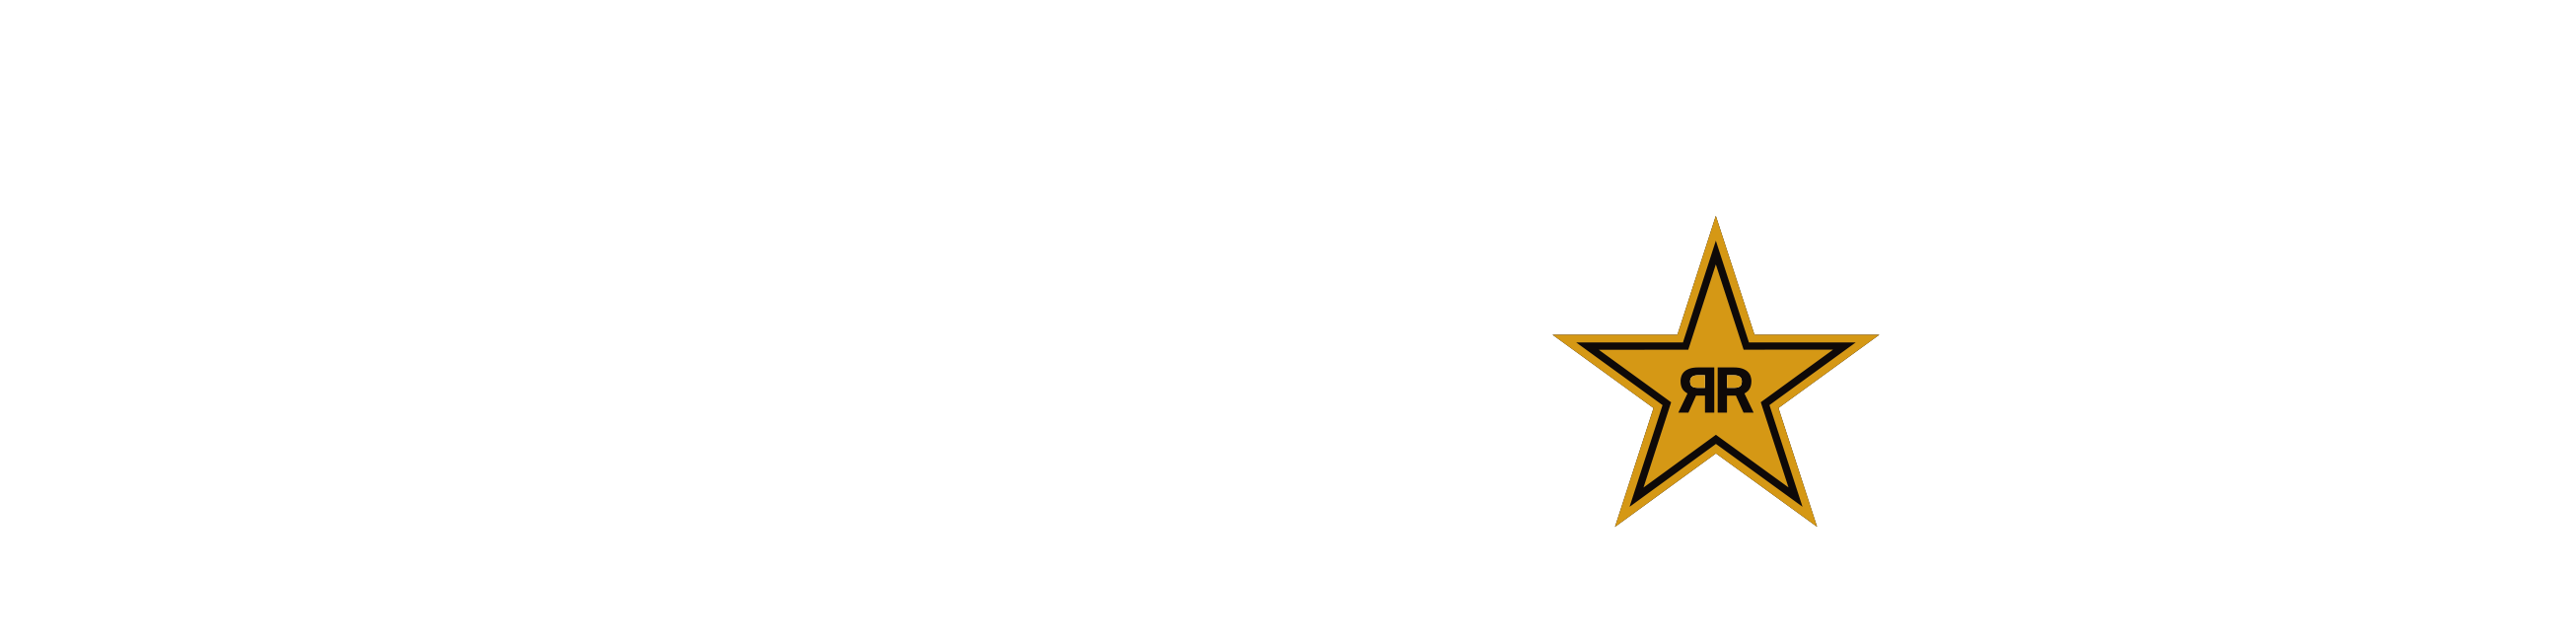 Fuel Your Drive with Rockstar Energy Drink. Logo image on page to get offer buy 2 Rockstar and buy gas, take a pic of your receipt, and text "ROCKSTAR" to 73774 for $5 back.